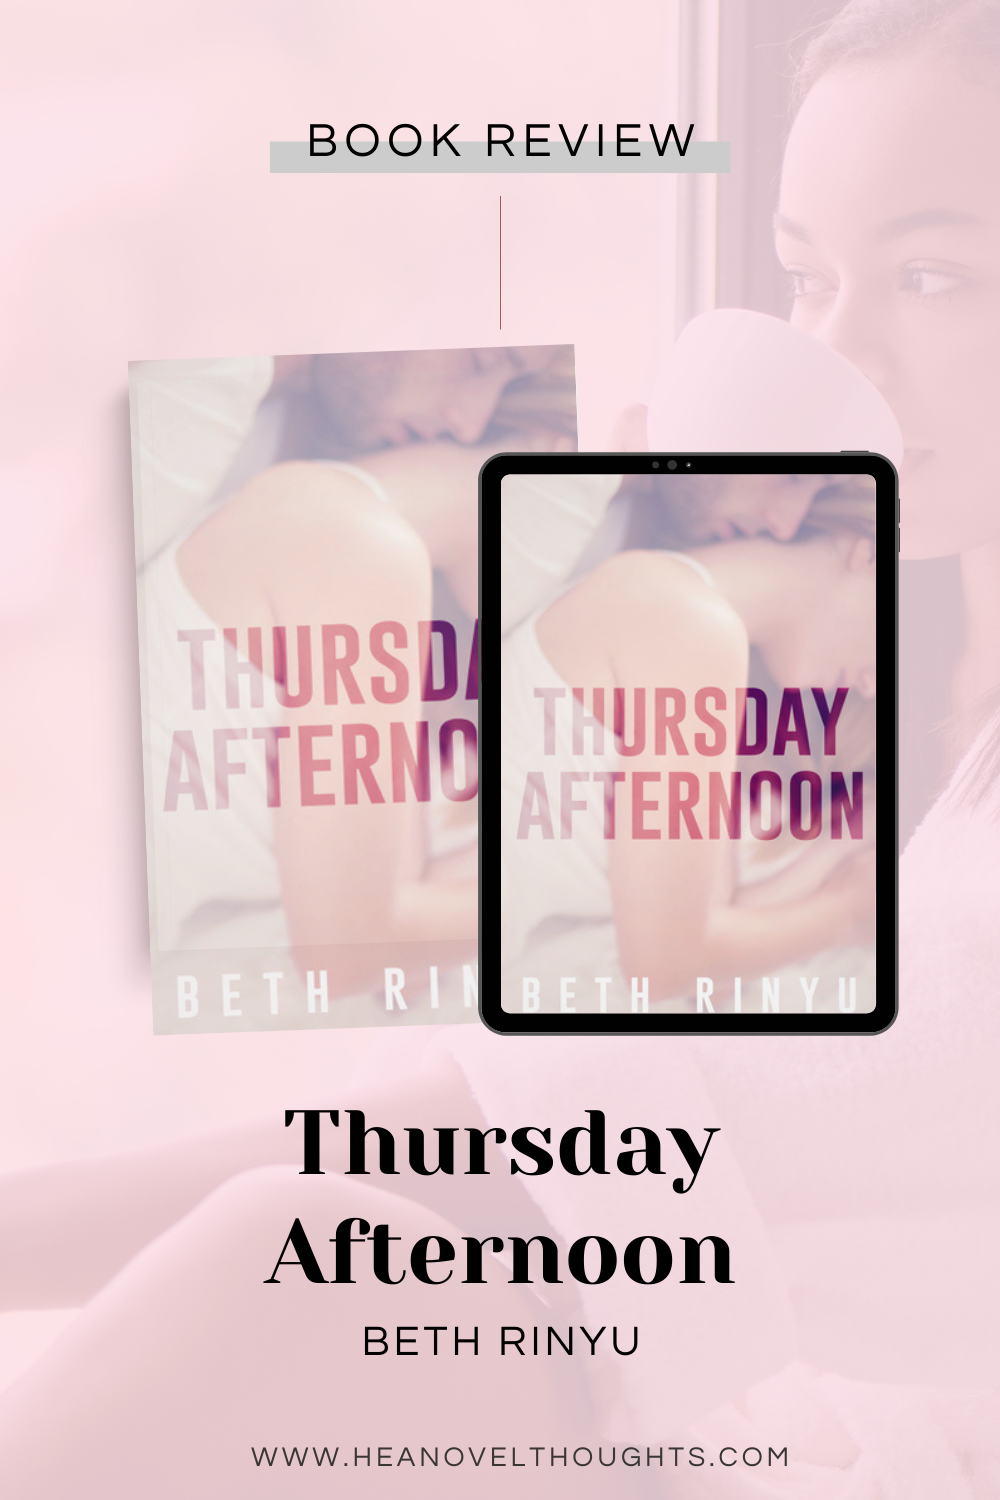 Thursday Afternoon by Beth Rinyu